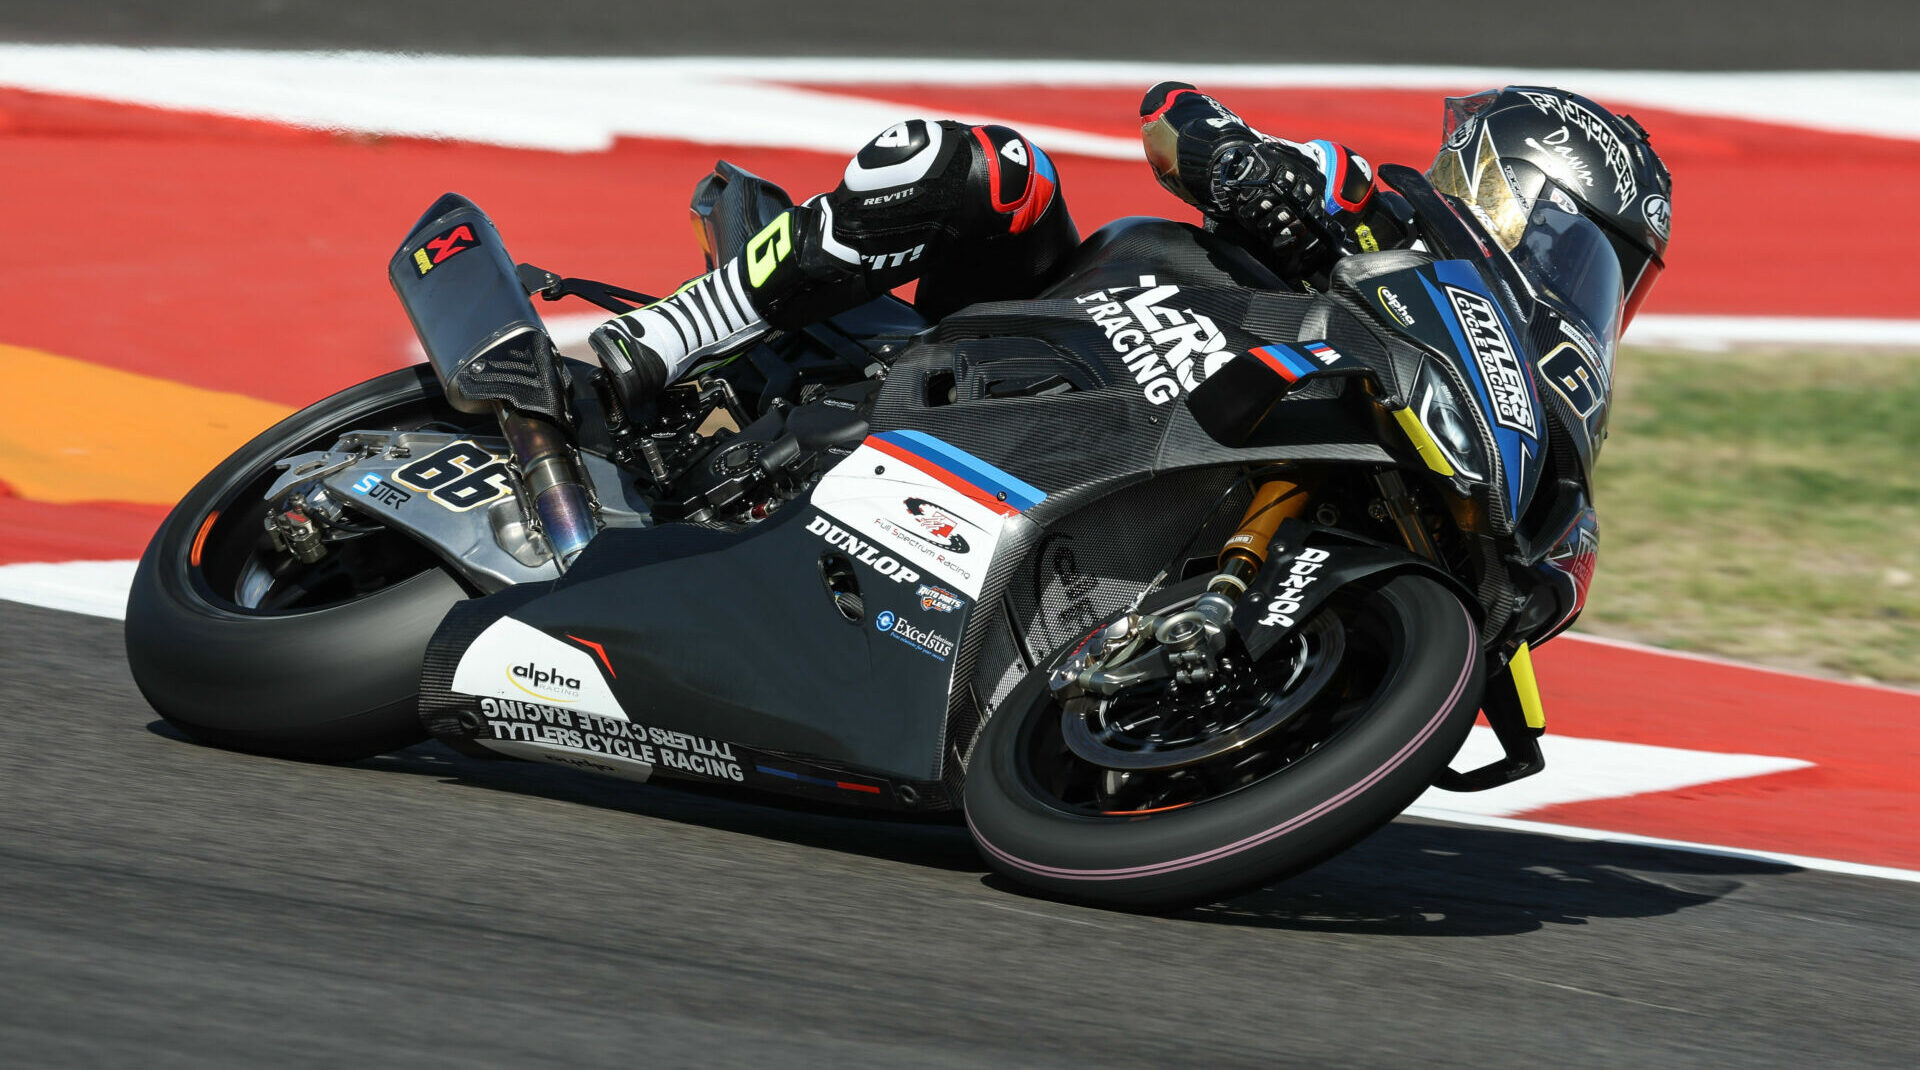 PJ Jacobsen (66), as seen at COTA. Photo by Brian J. Nelson.